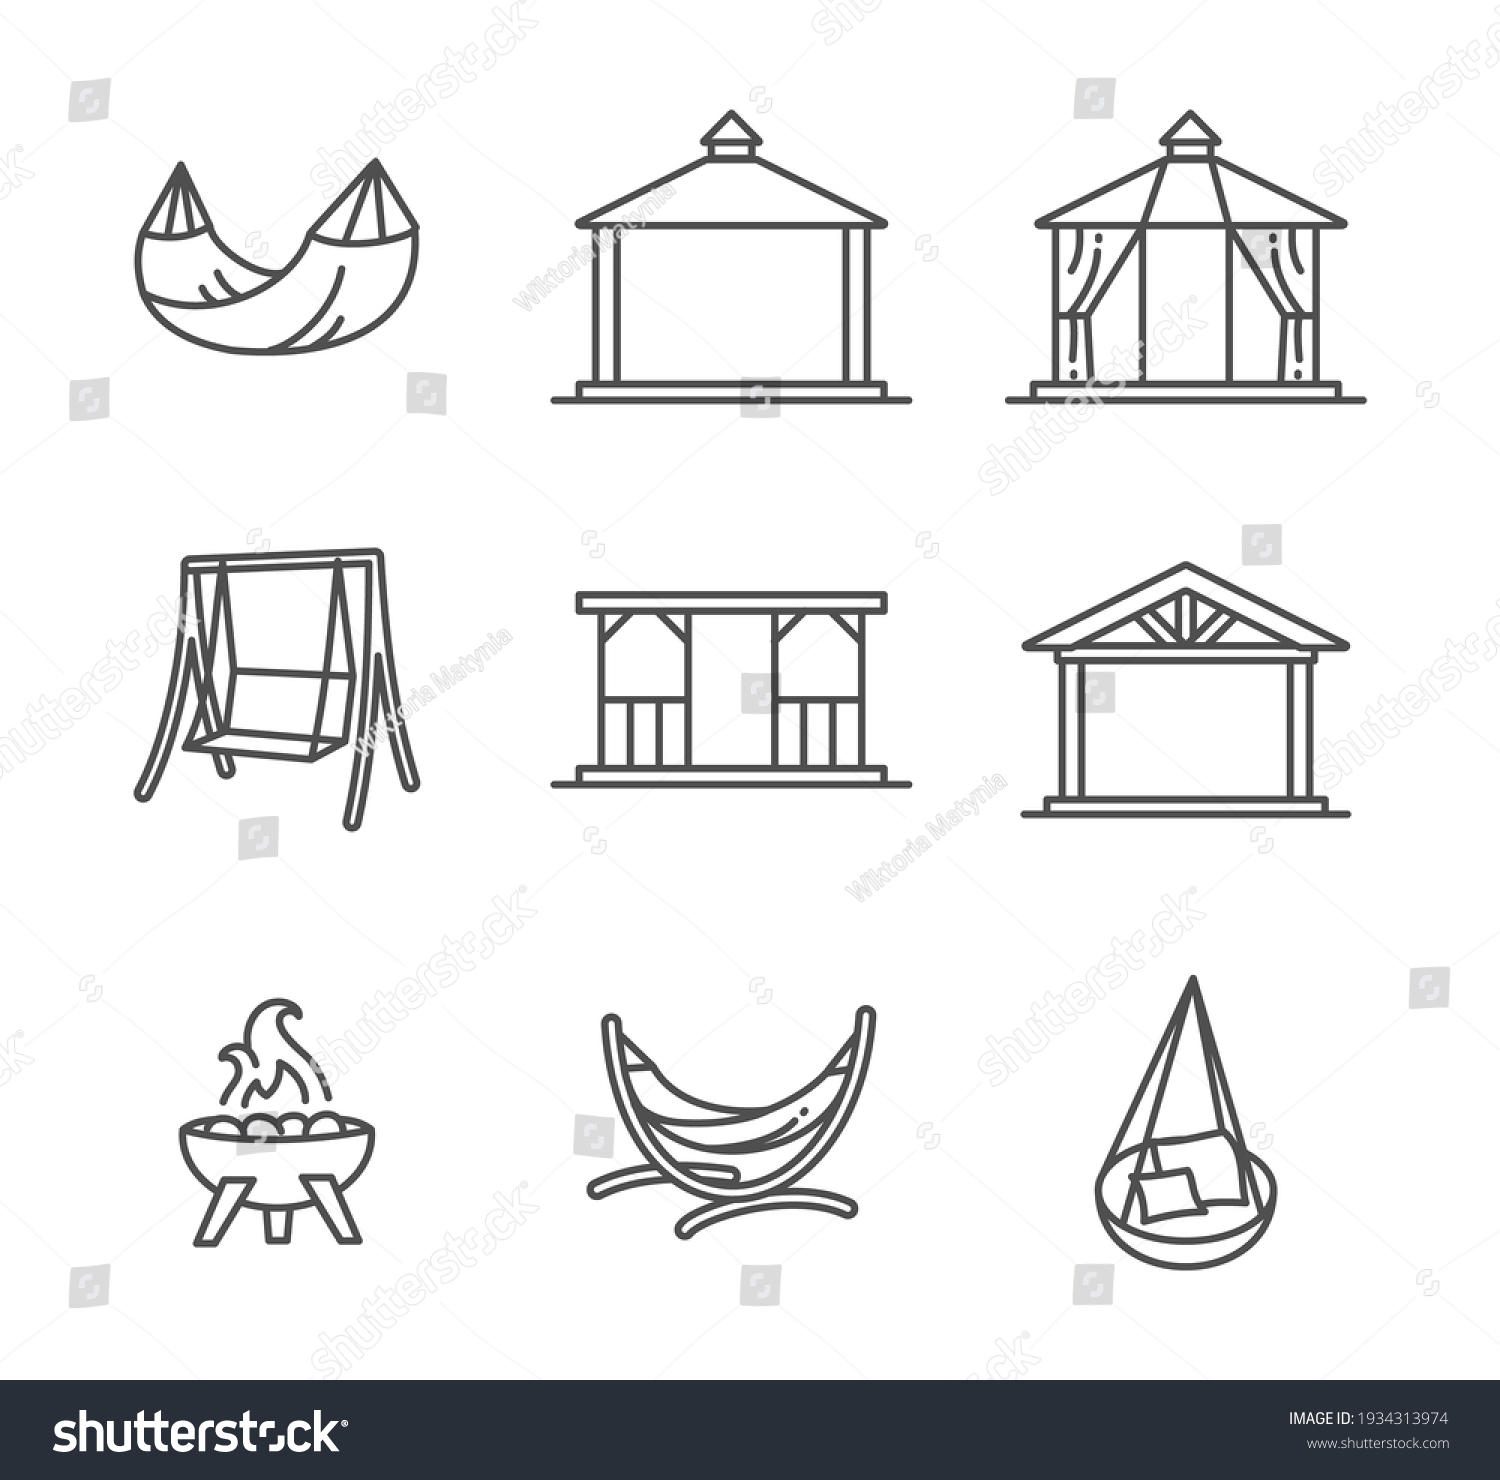 Garden structures, buildings and furniture thin line style icon set vector #1934313974